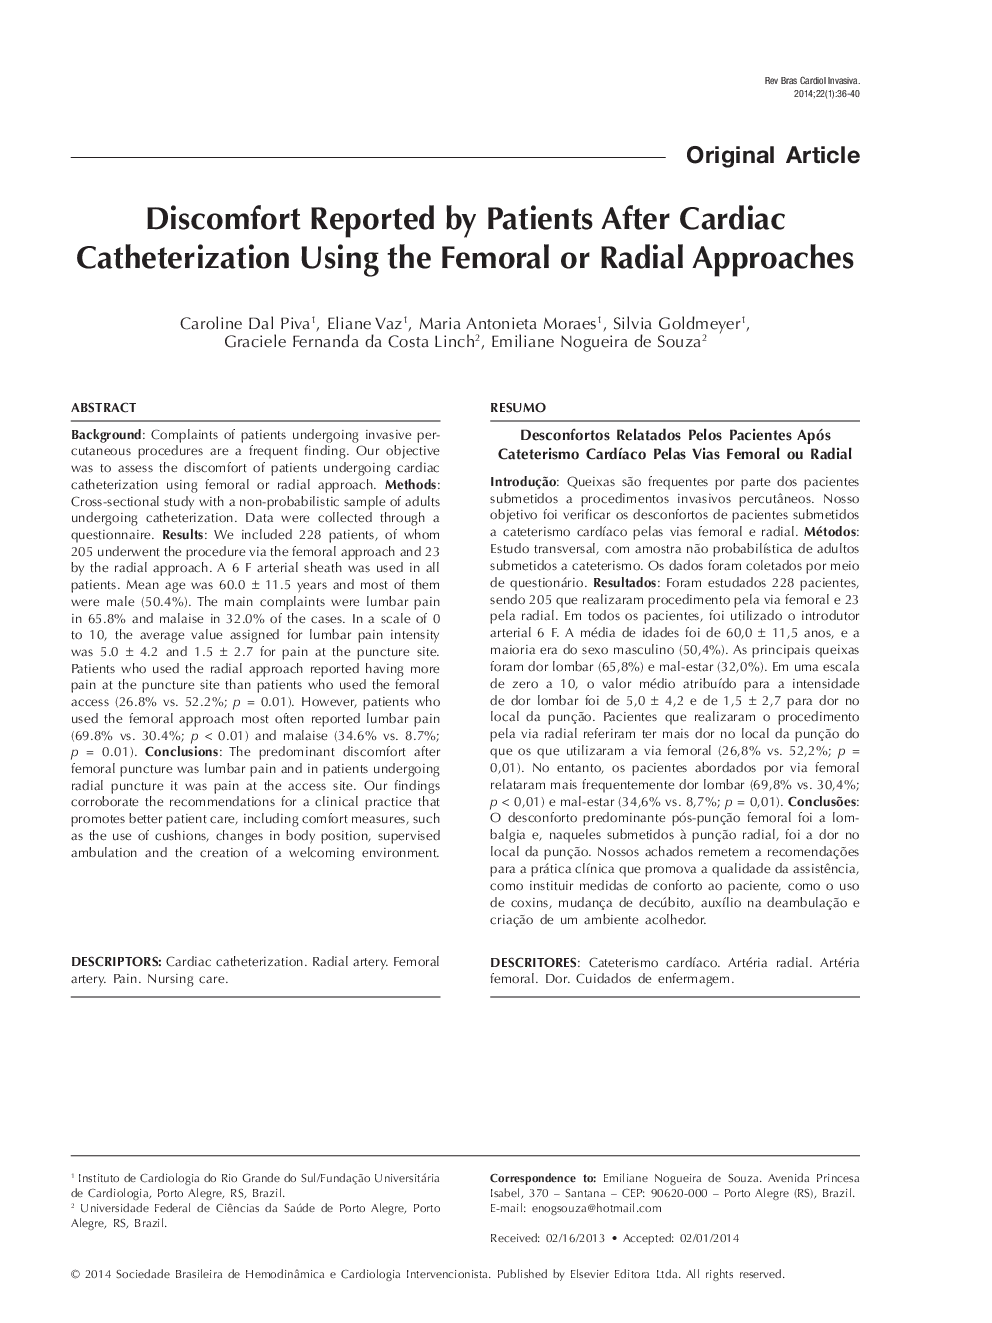 Discomfort Reported by Patients After Cardiac Catheterization Using the Femoral or Radial Approaches